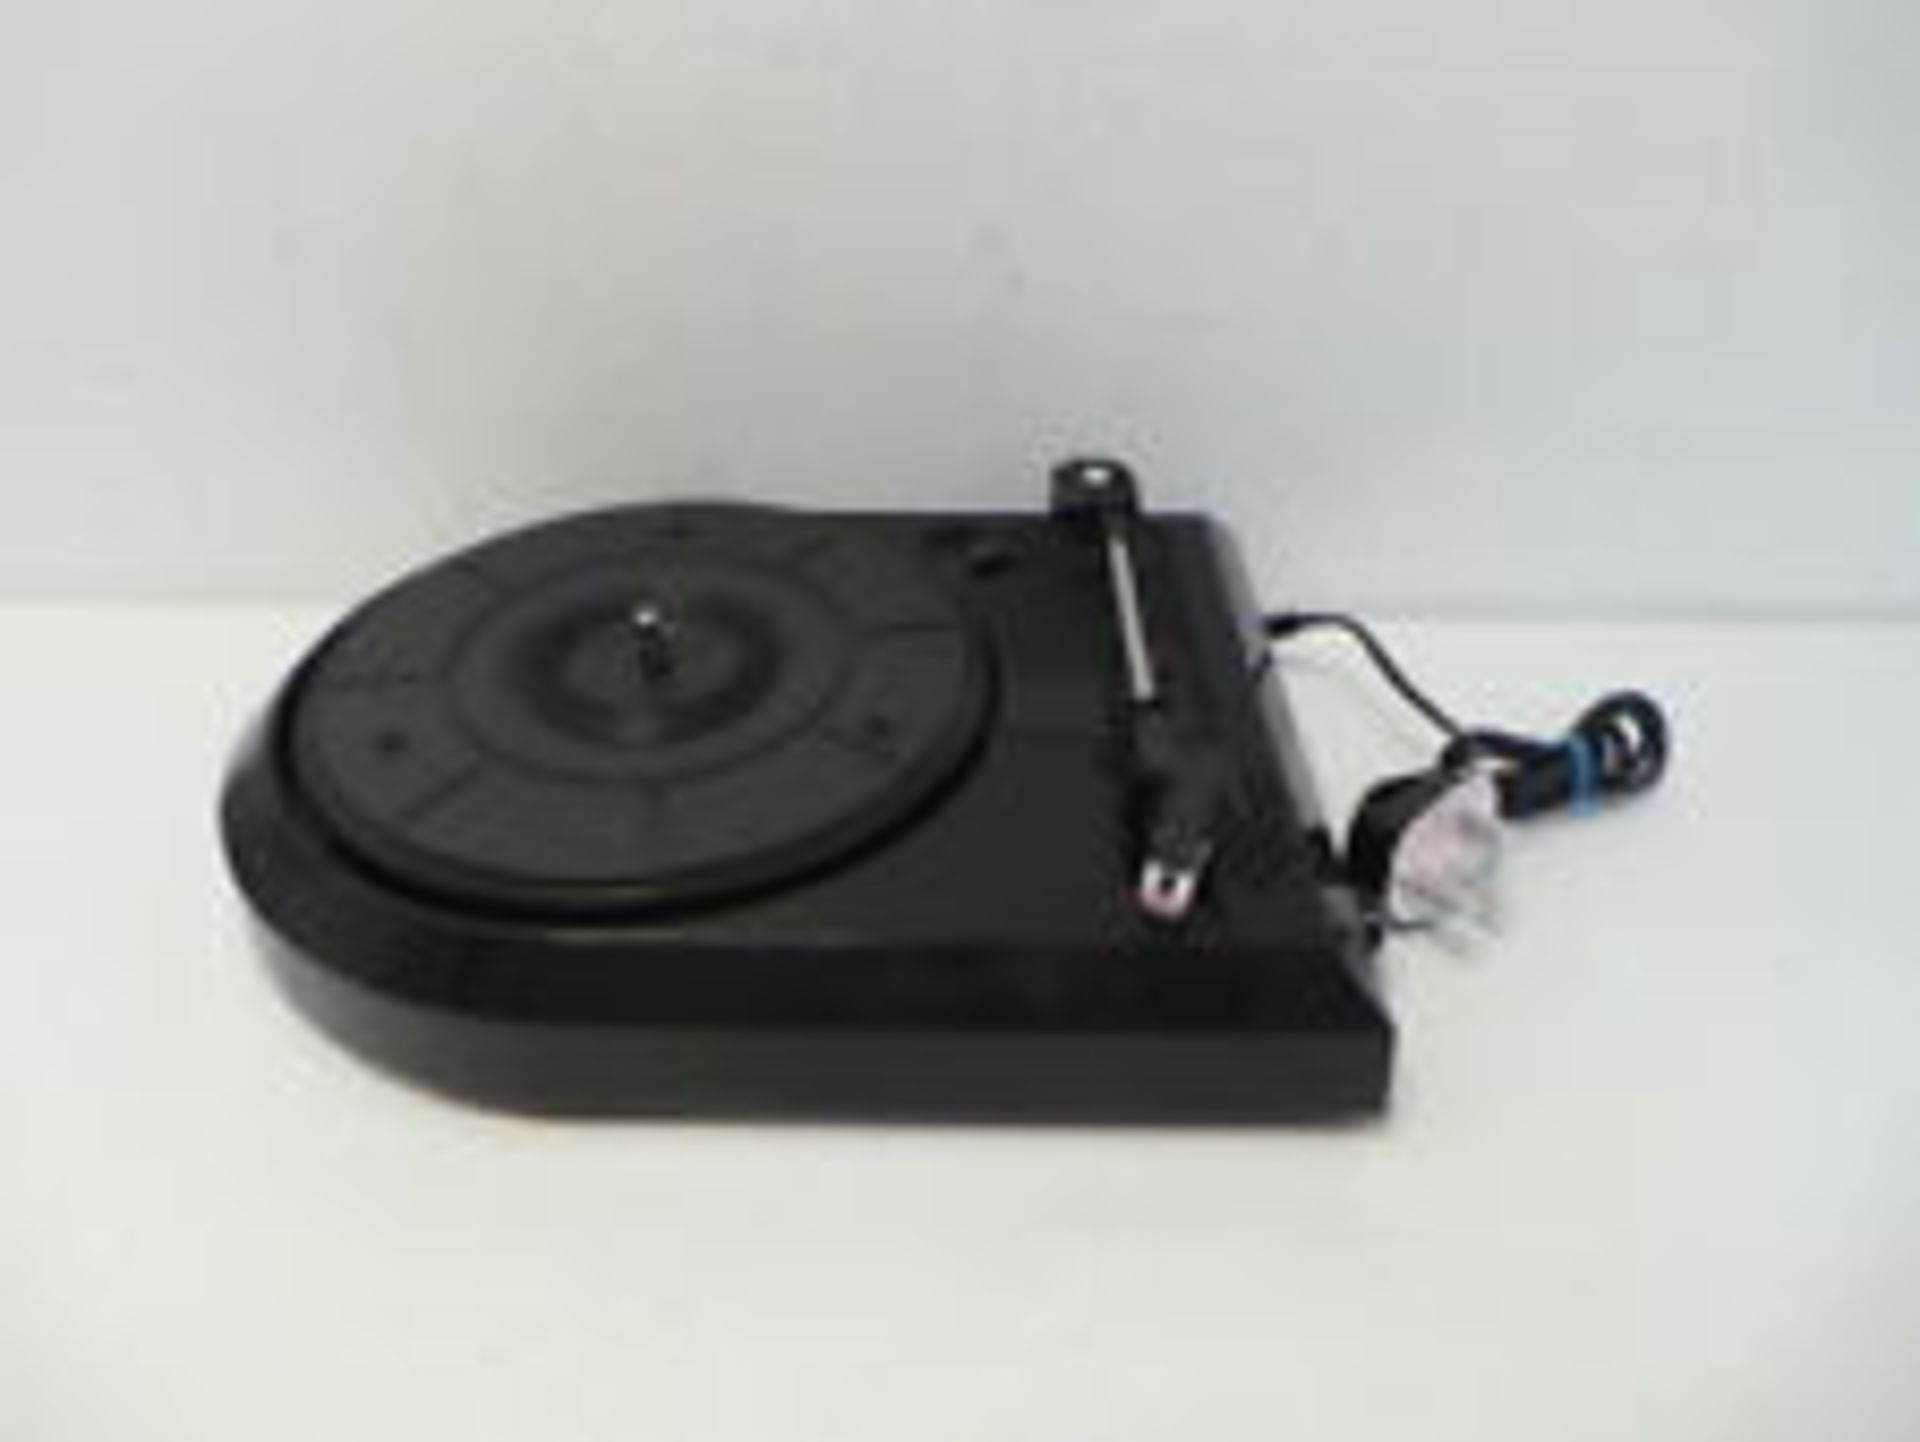 V Brand New Zennox USB Turntable With Built In Speaker With Volume Control Convert LP Records To - Bild 2 aus 2